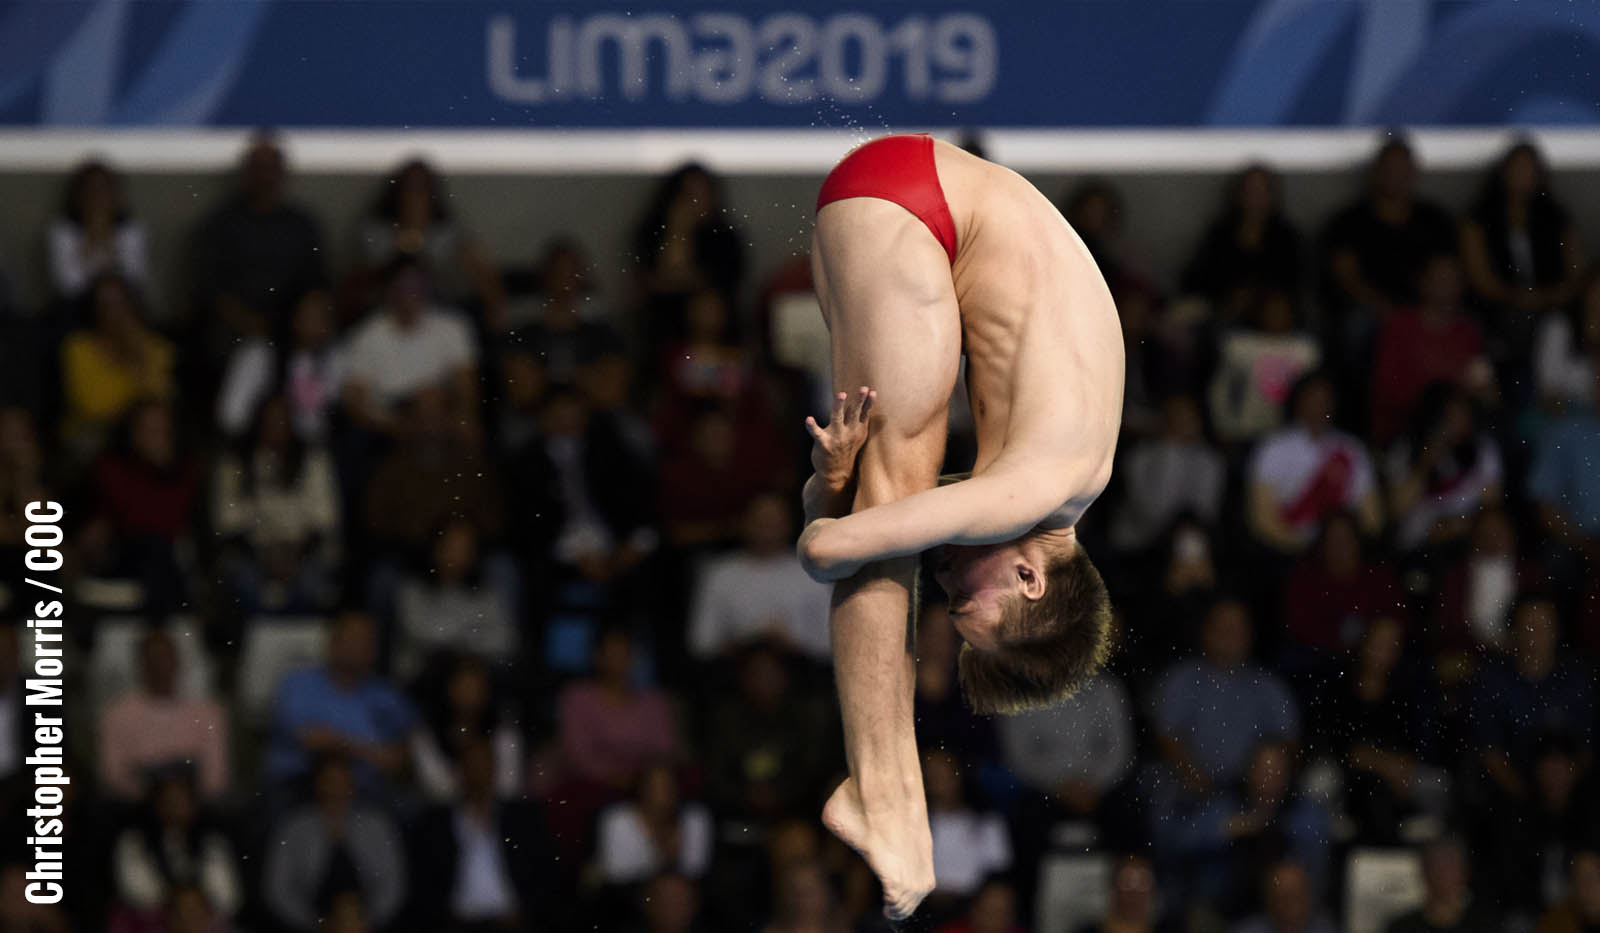 Lima: successful Sunday for Canada at Pan Am Games